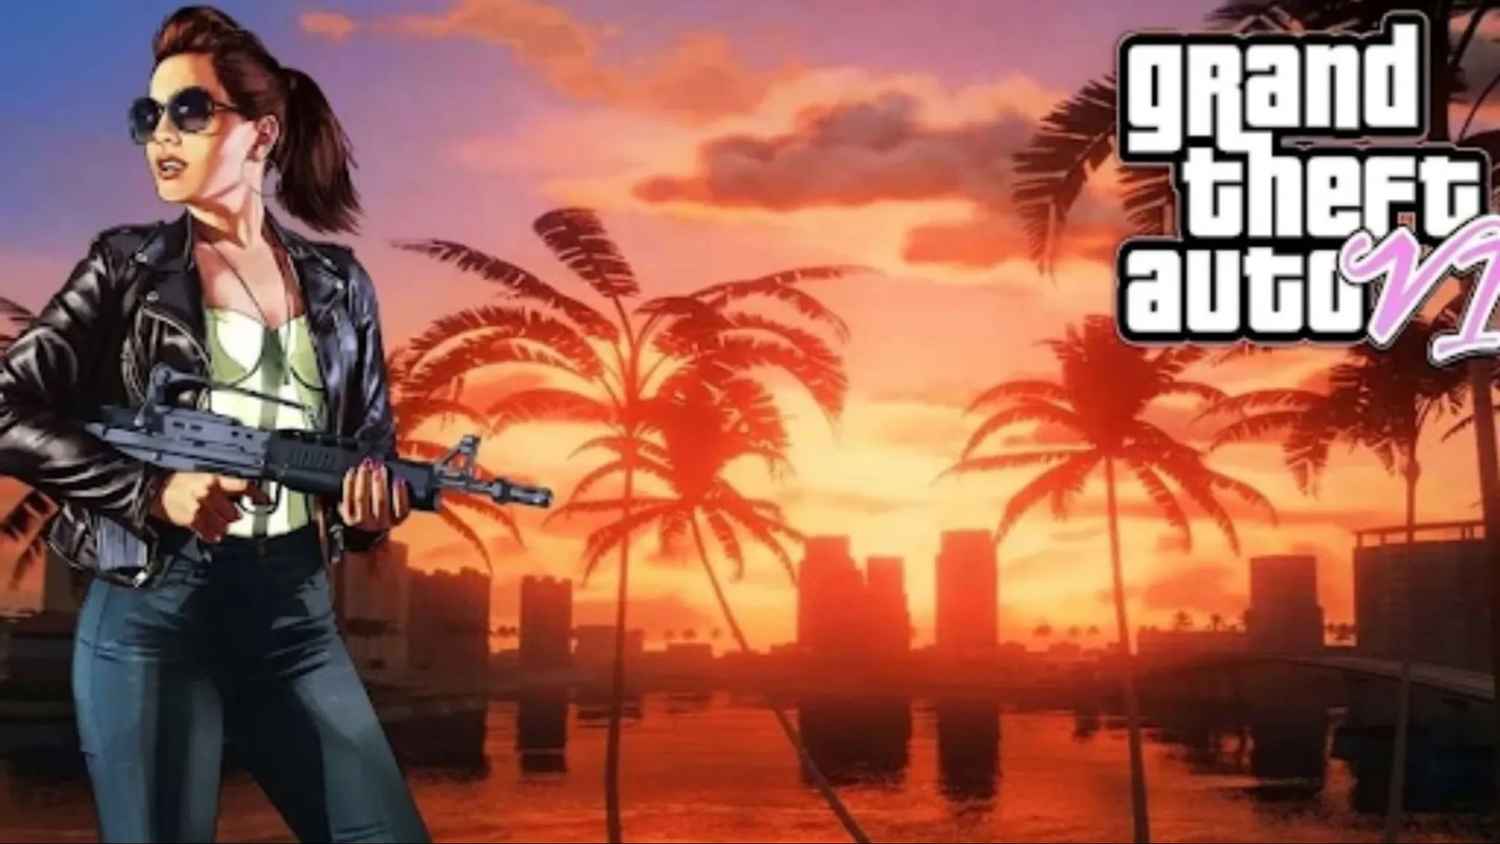 GTA 6 may be unplayable for millions of players, as it won’t support older consoles